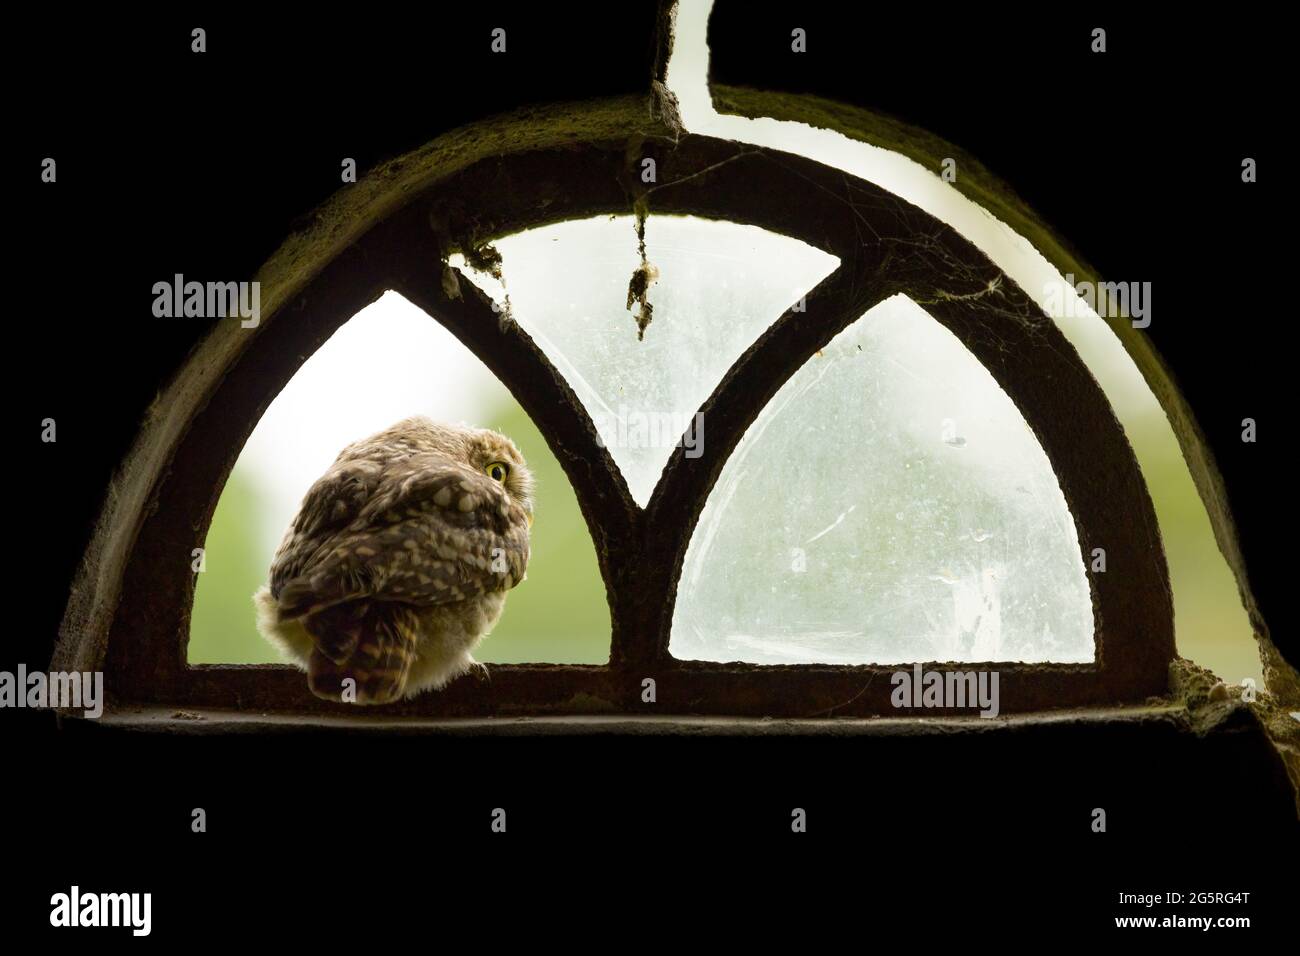 A close up of a little owl (Athene noctua) looking out of the broken window of an old barn Stock Photo